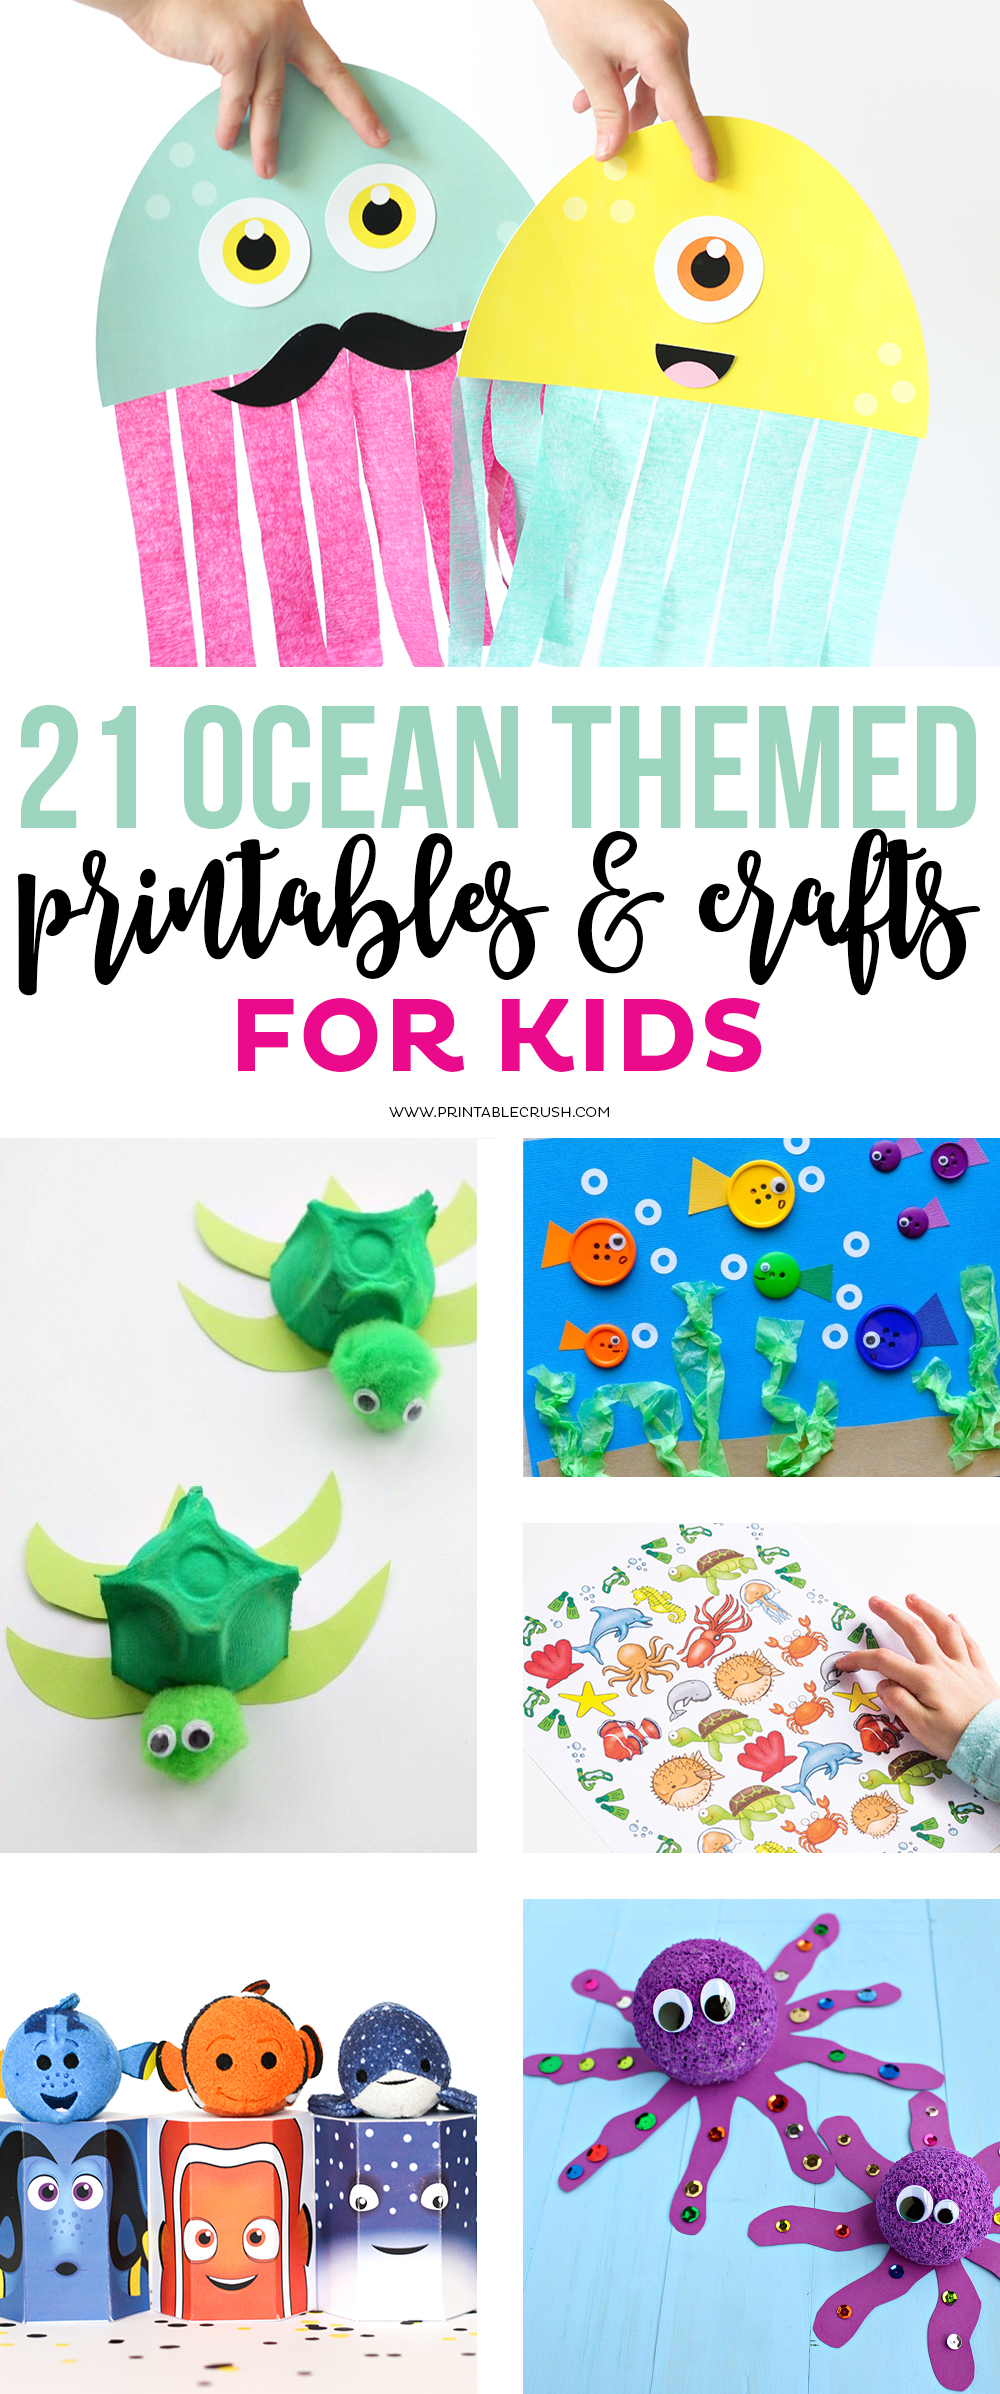 http://printablecrush.com/wp-content/uploads/2016/08/Ocean-themed-pritnables-and-crafts-for-kids.jpg